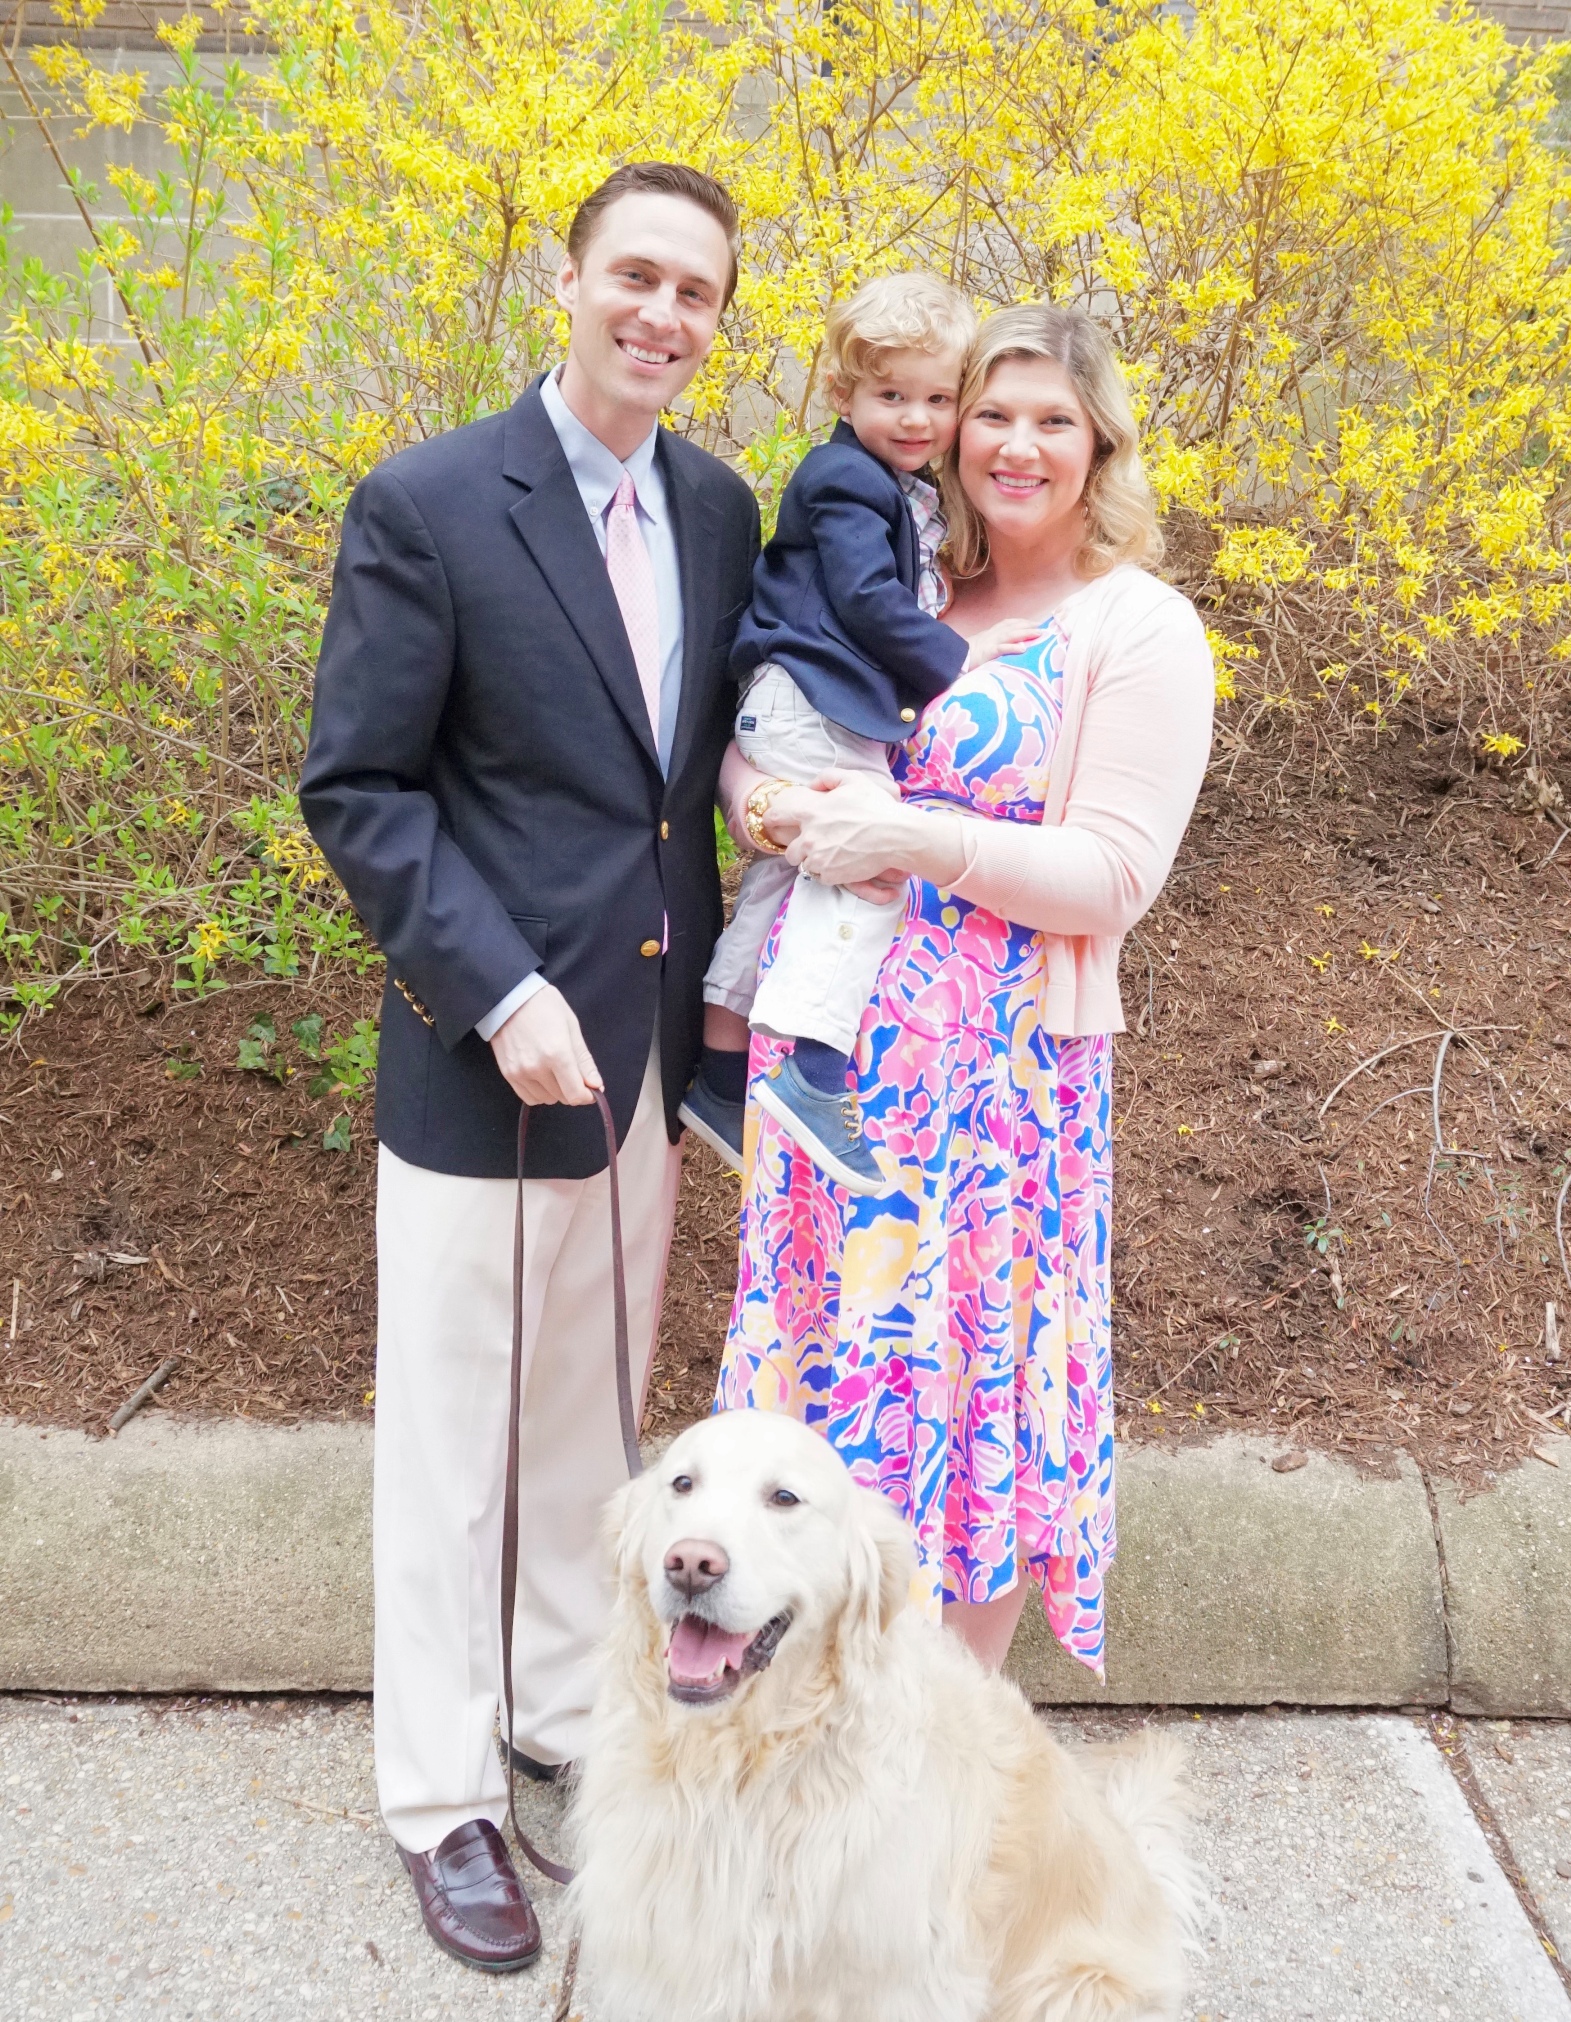 Happy Easter from our Family!